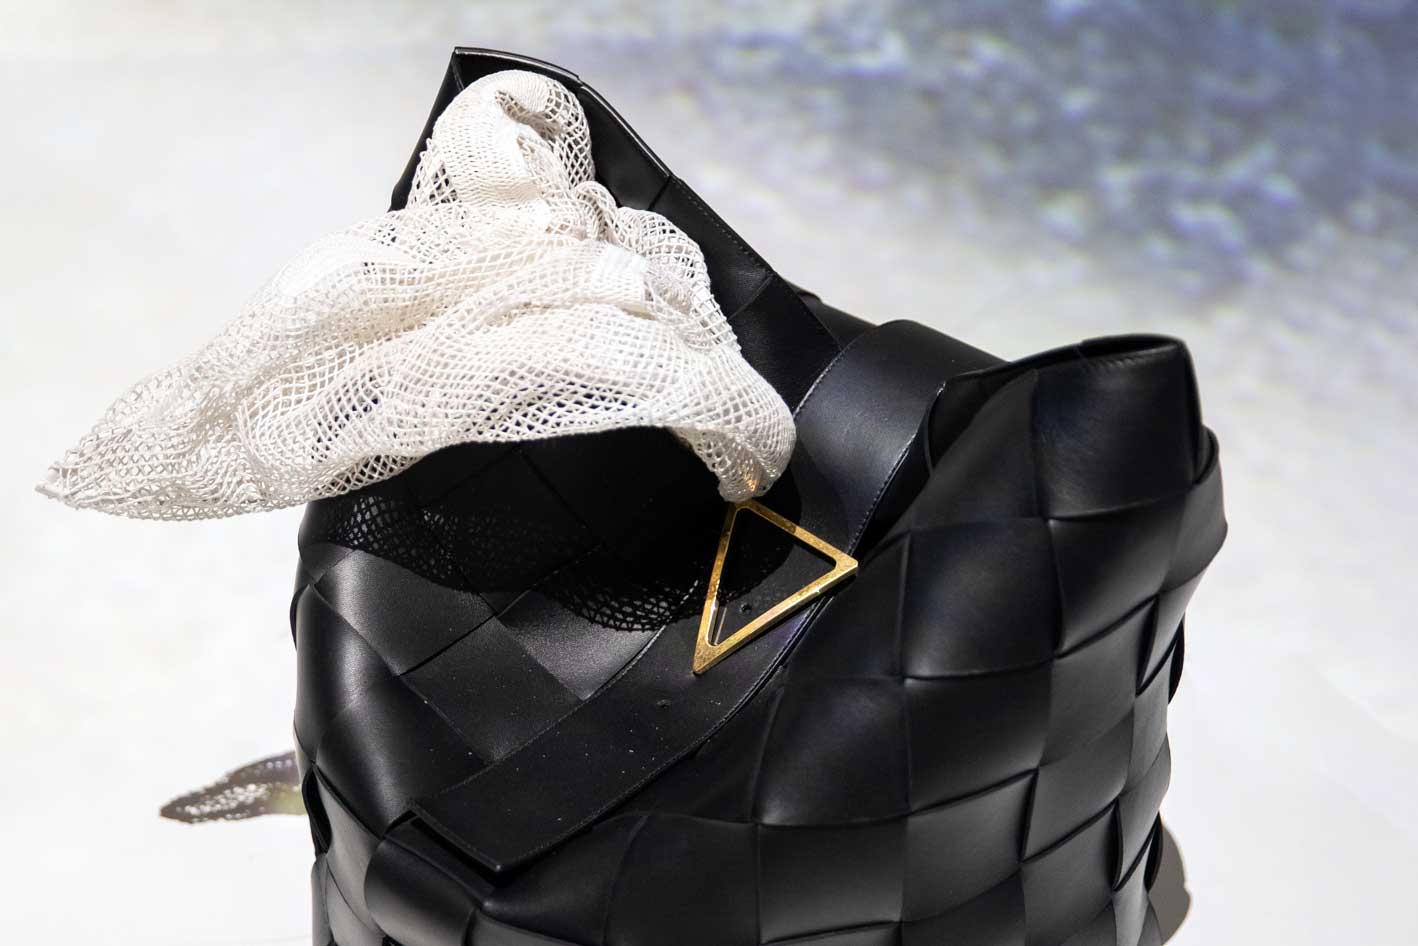 Must Read: Can Luxury Bags Be Smart Investments? Matthieu Blazy